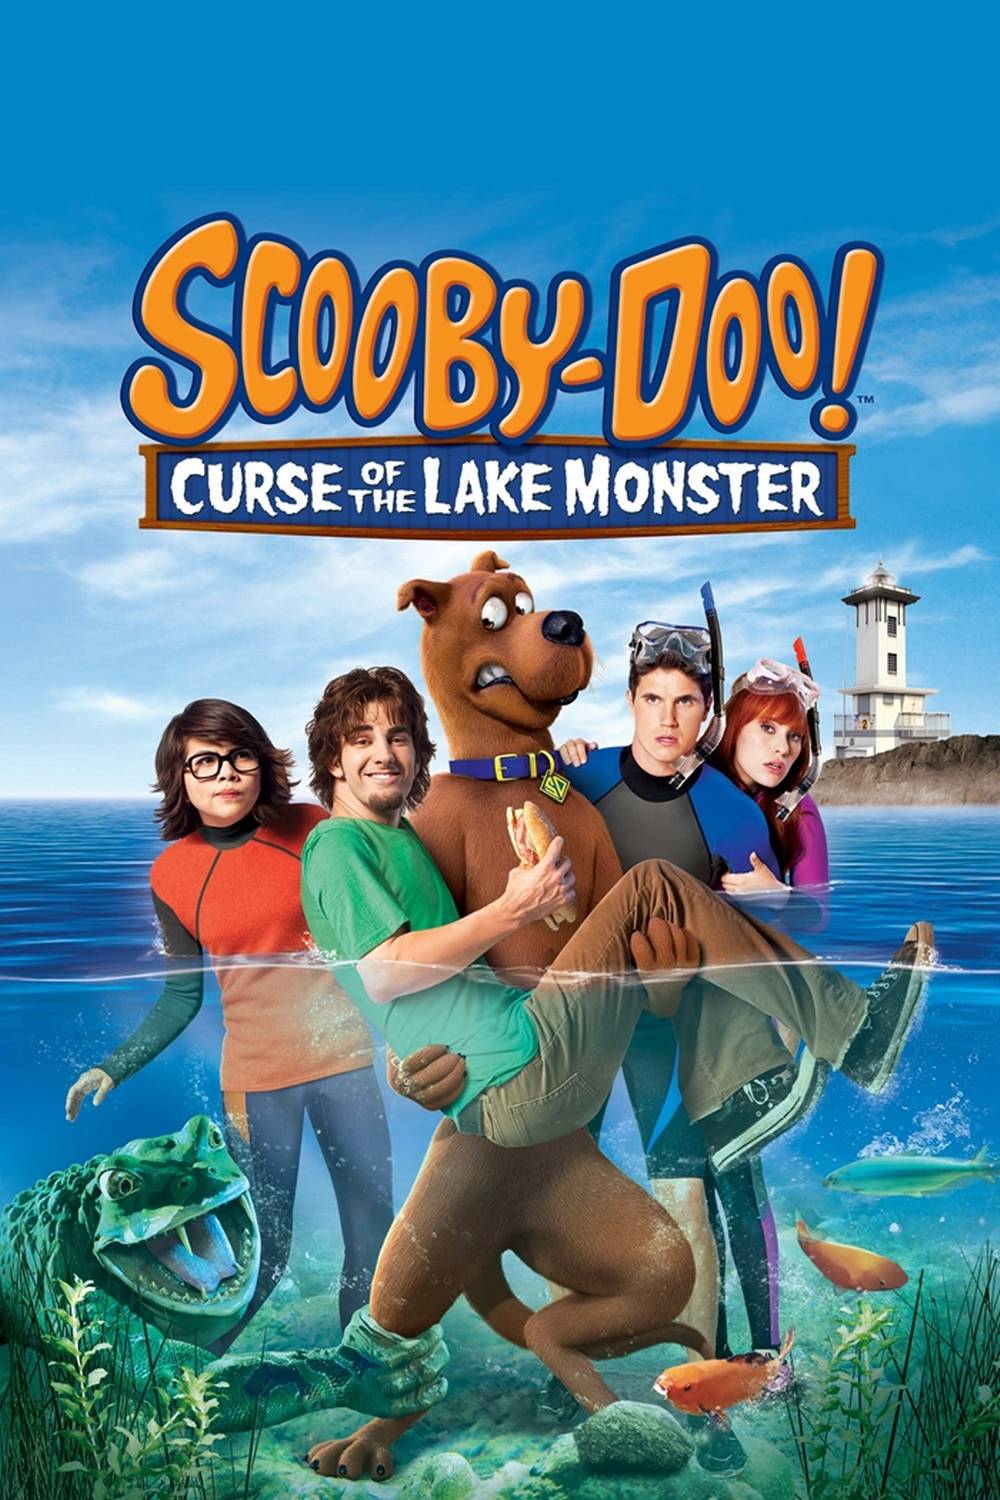 Scooby-Doo Curse of the Lake Monster